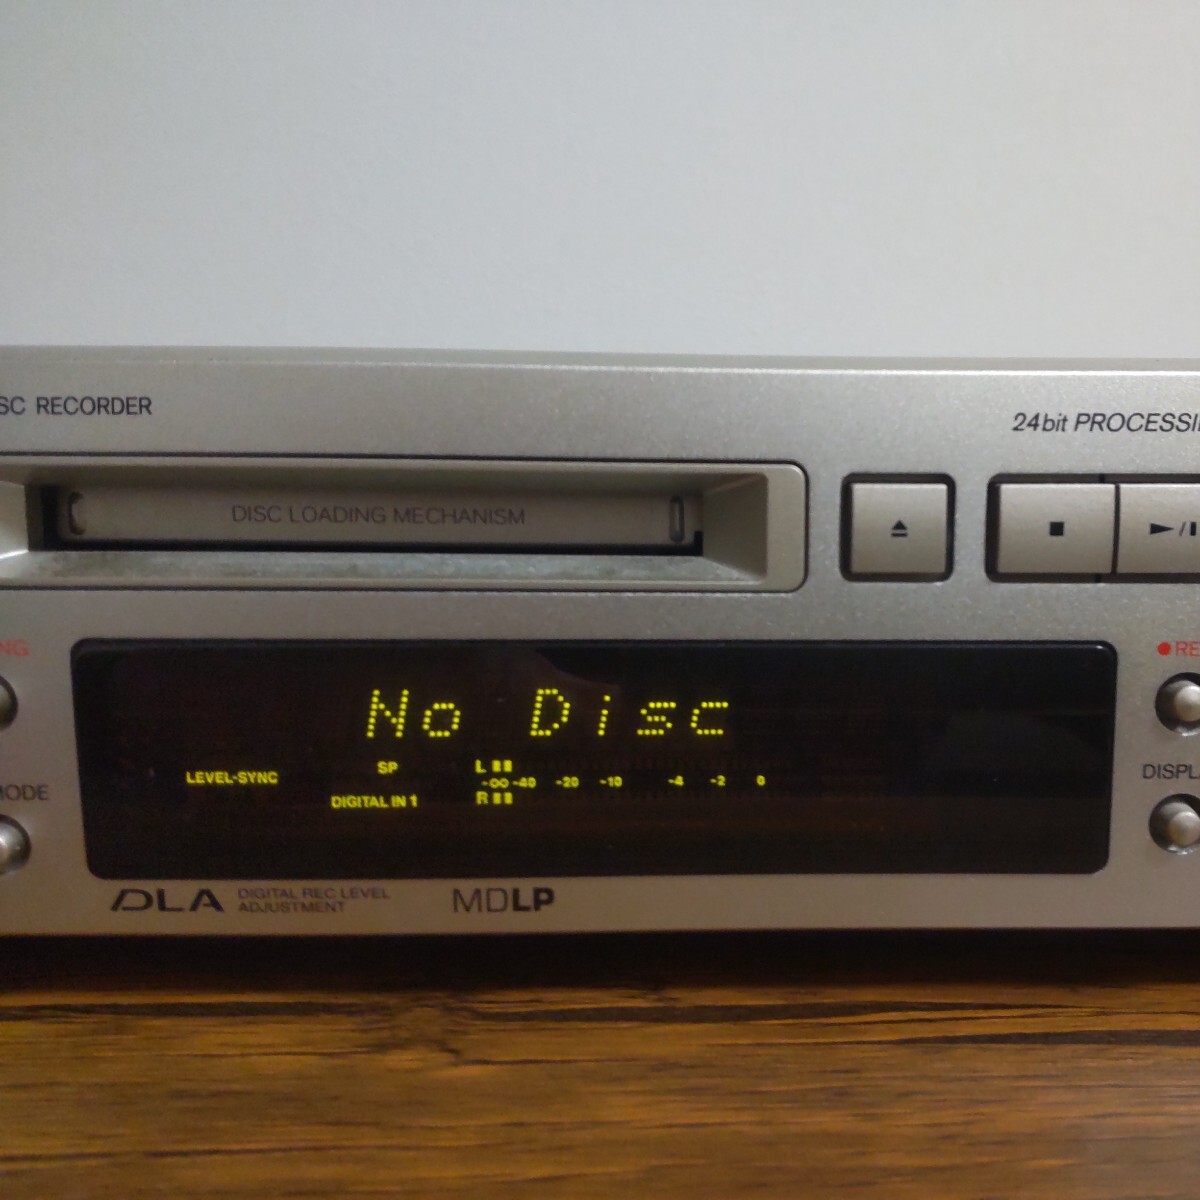  Onkyo ONKYO MD recorder MD-105TX(MDLP correspondence ) with defect junk treatment 